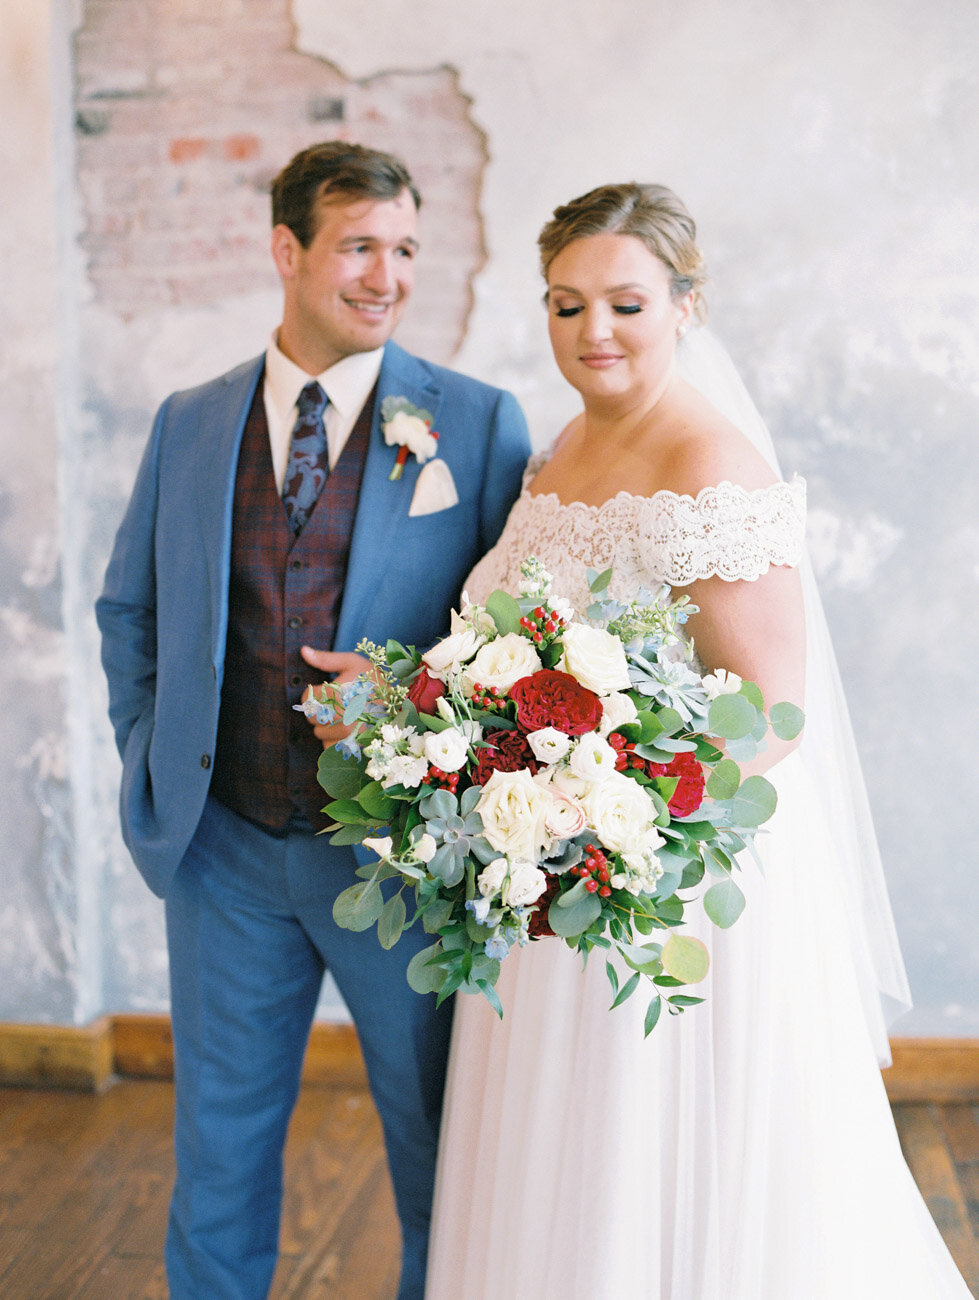 Downtown-Kansas-City-Wedding-Venues-The-Bauer-Bride-and-Groom.jpg